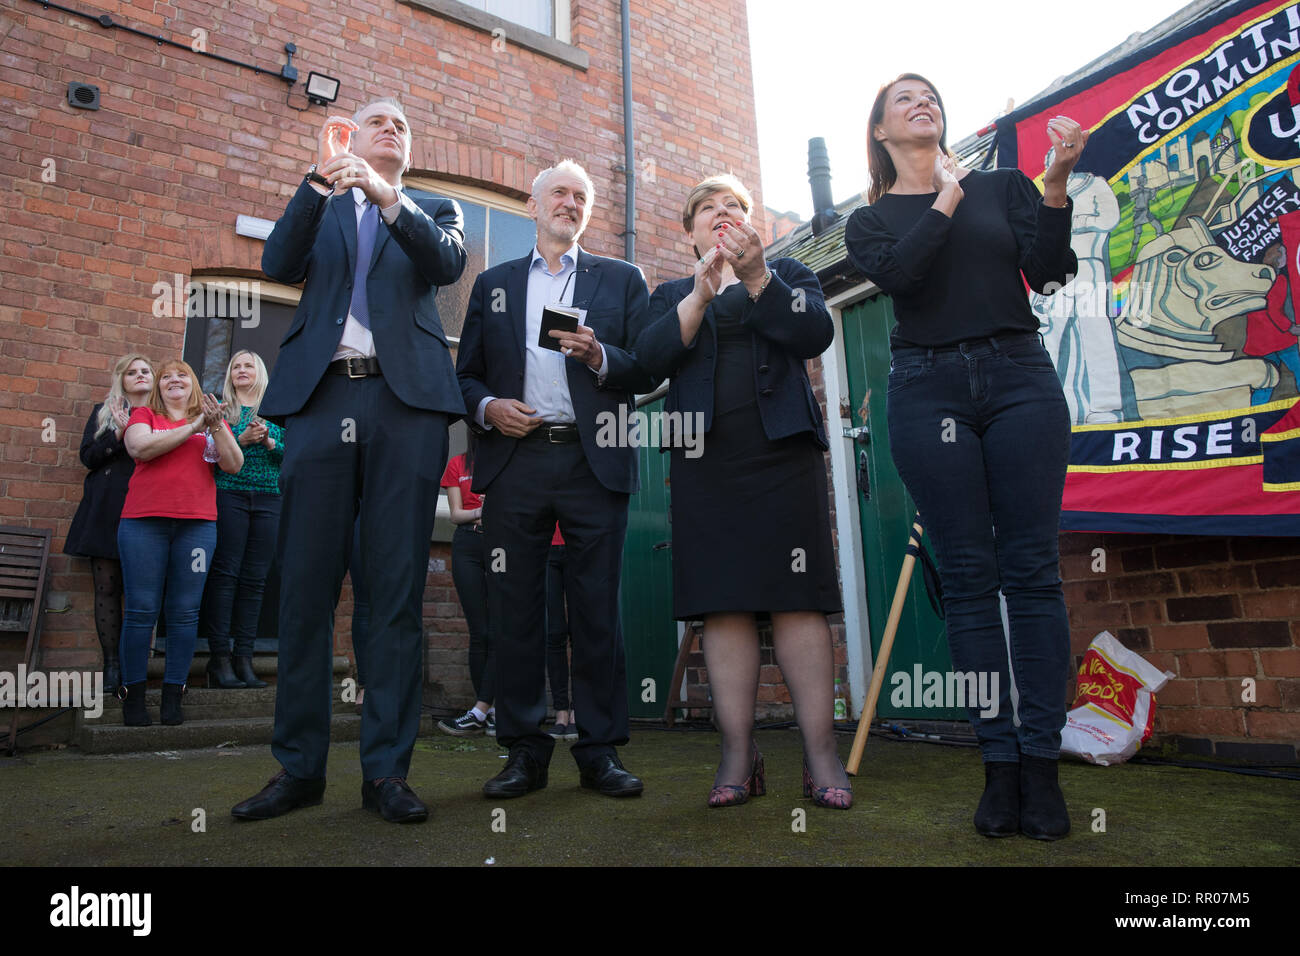 (left to right) Prospective Parliamentary Candidate for Broxtowe, Greg Marshall, Labour Party leader Jeremy Corbyn, shadow foreign secretary Emily Thornberry and Labour MP Gloria De Piero , at a rally at Voluntary Action in Beeston, which falls in Independent MP Anna Soubry's constituency of Broxtowe. Stock Photo